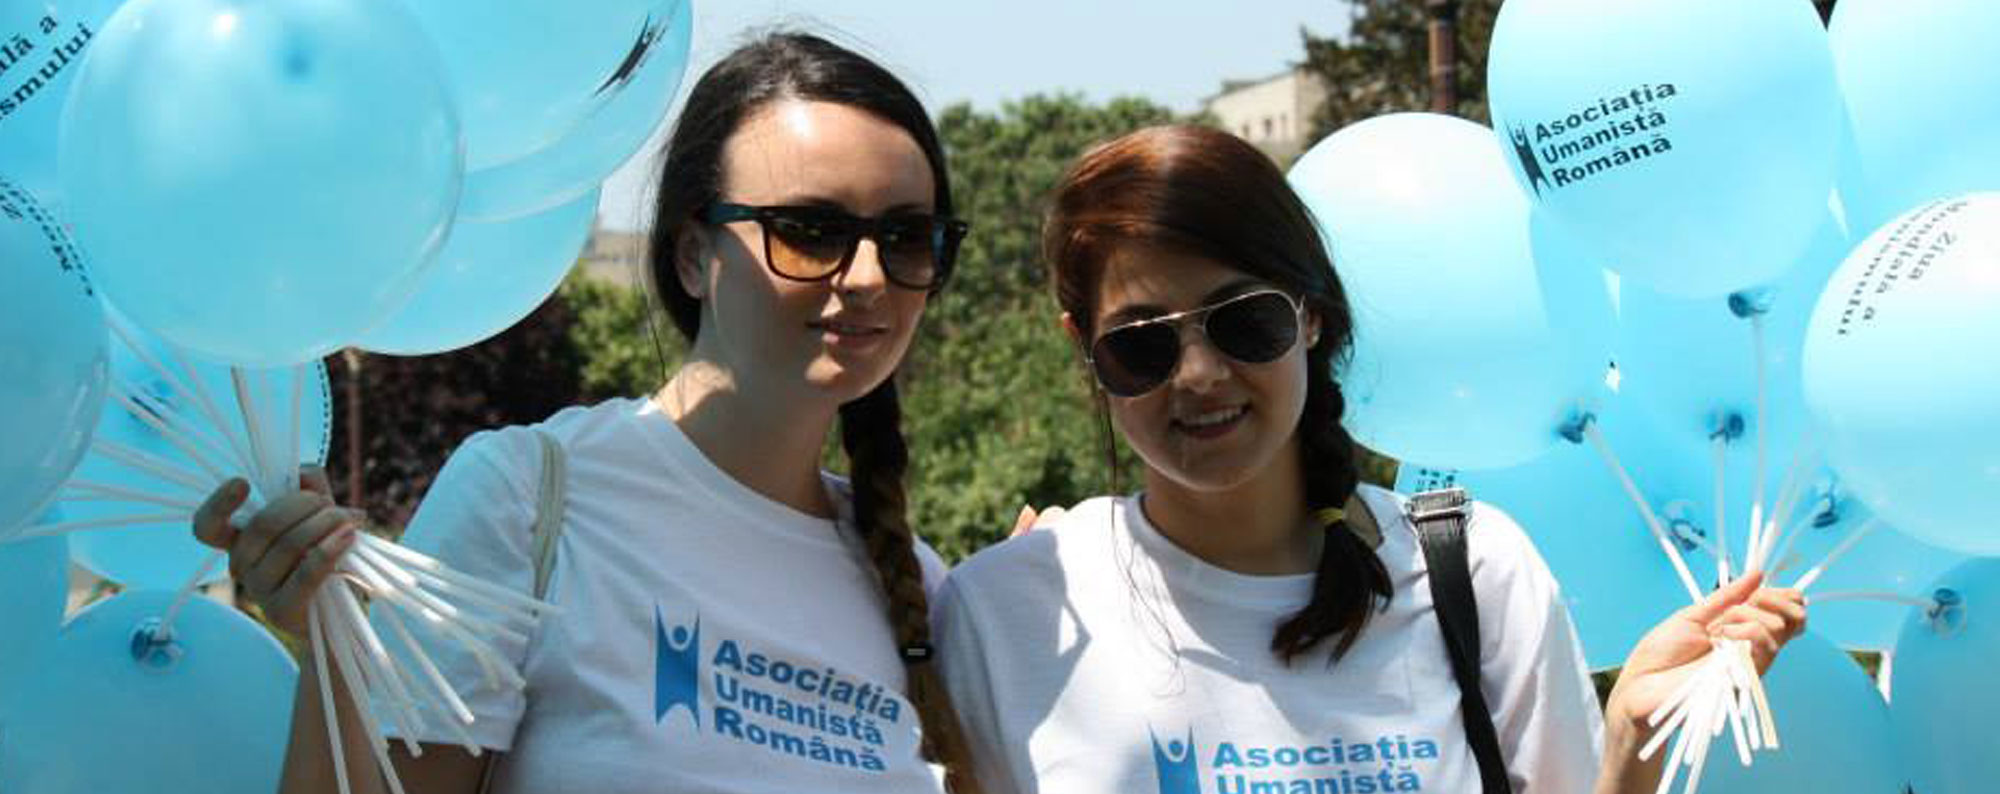 Humanists in Romania mark World Humanist Day by promoting their humanist association on the streets of Bucharest.